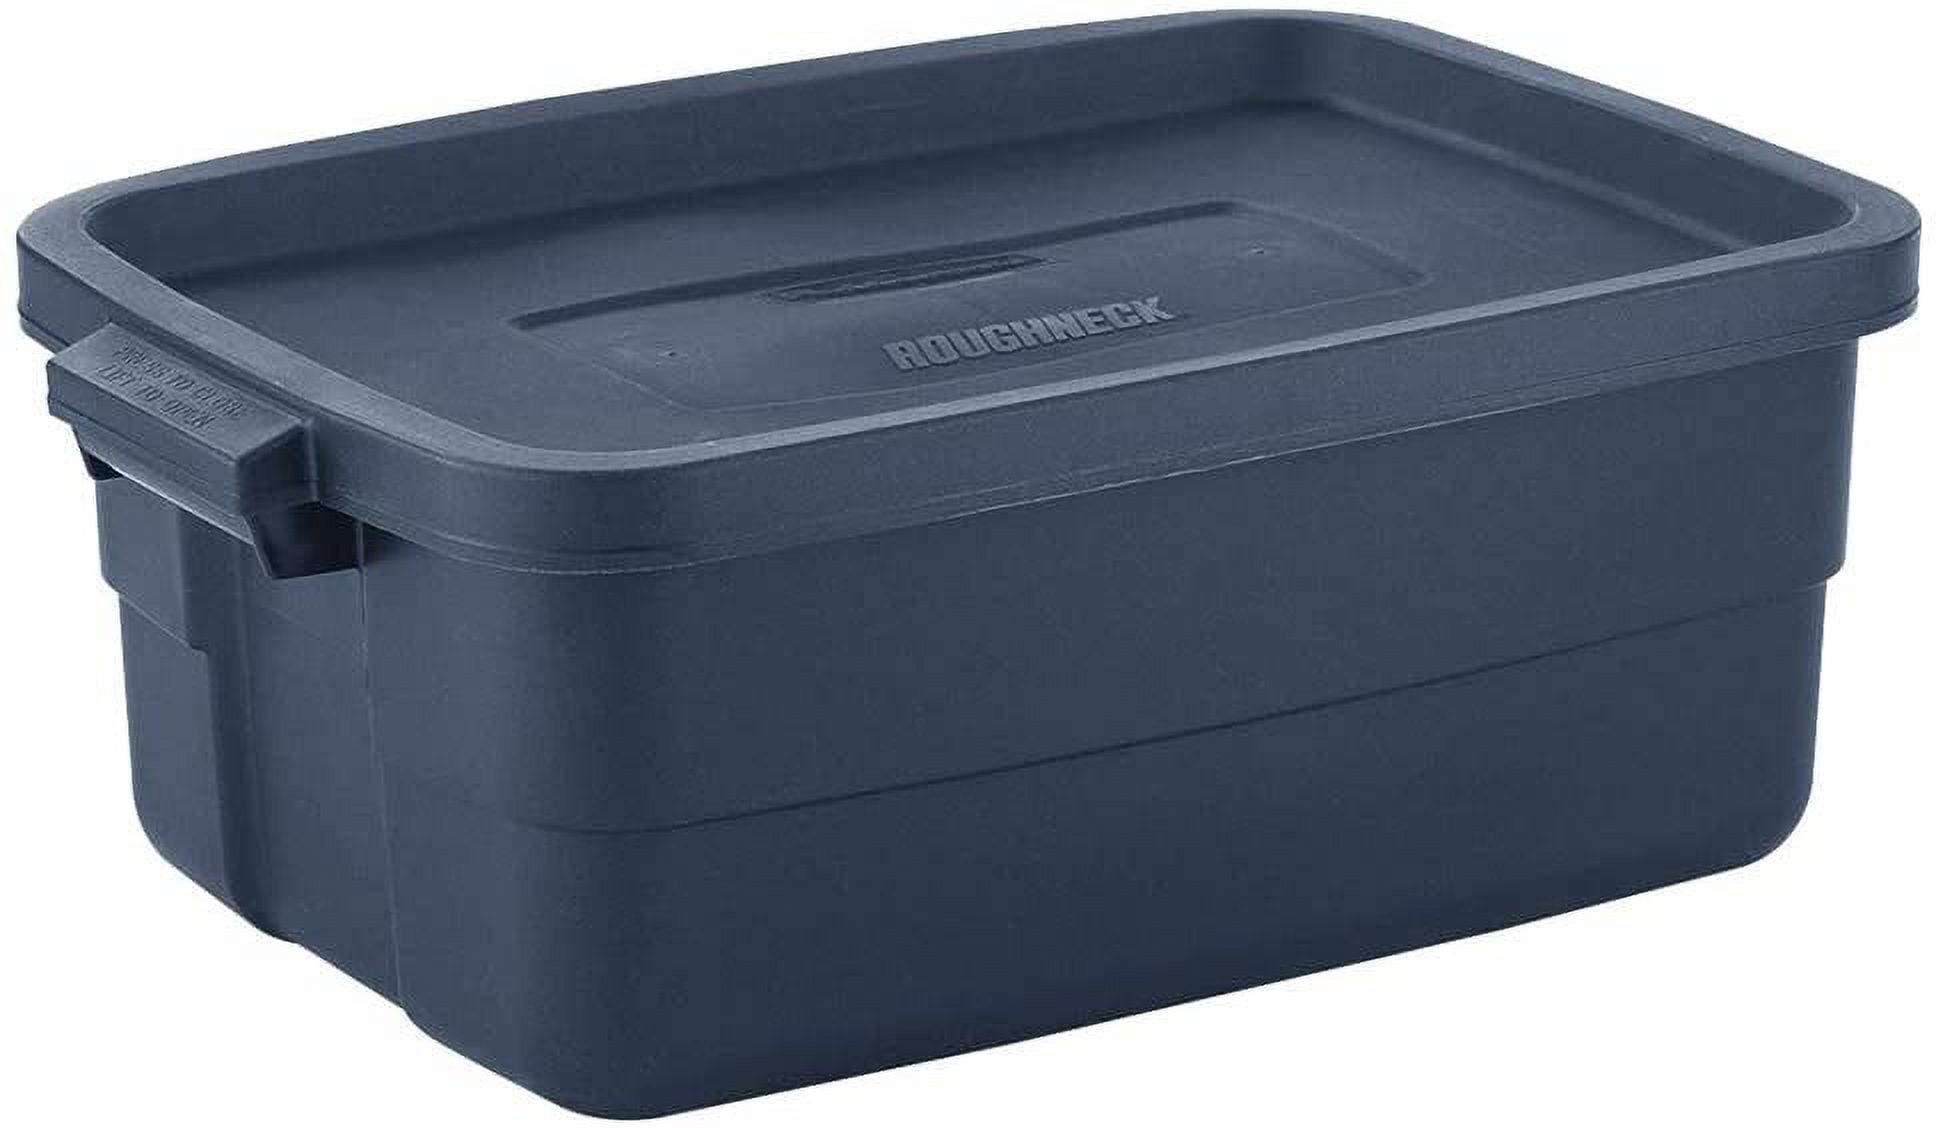 Rubbermaid Roughneck Tote 10 Gallon Stackable Storage Container w/ Cool  Gray Stay Tight Lid & Easy Carry Handles, Black (6 Pack)